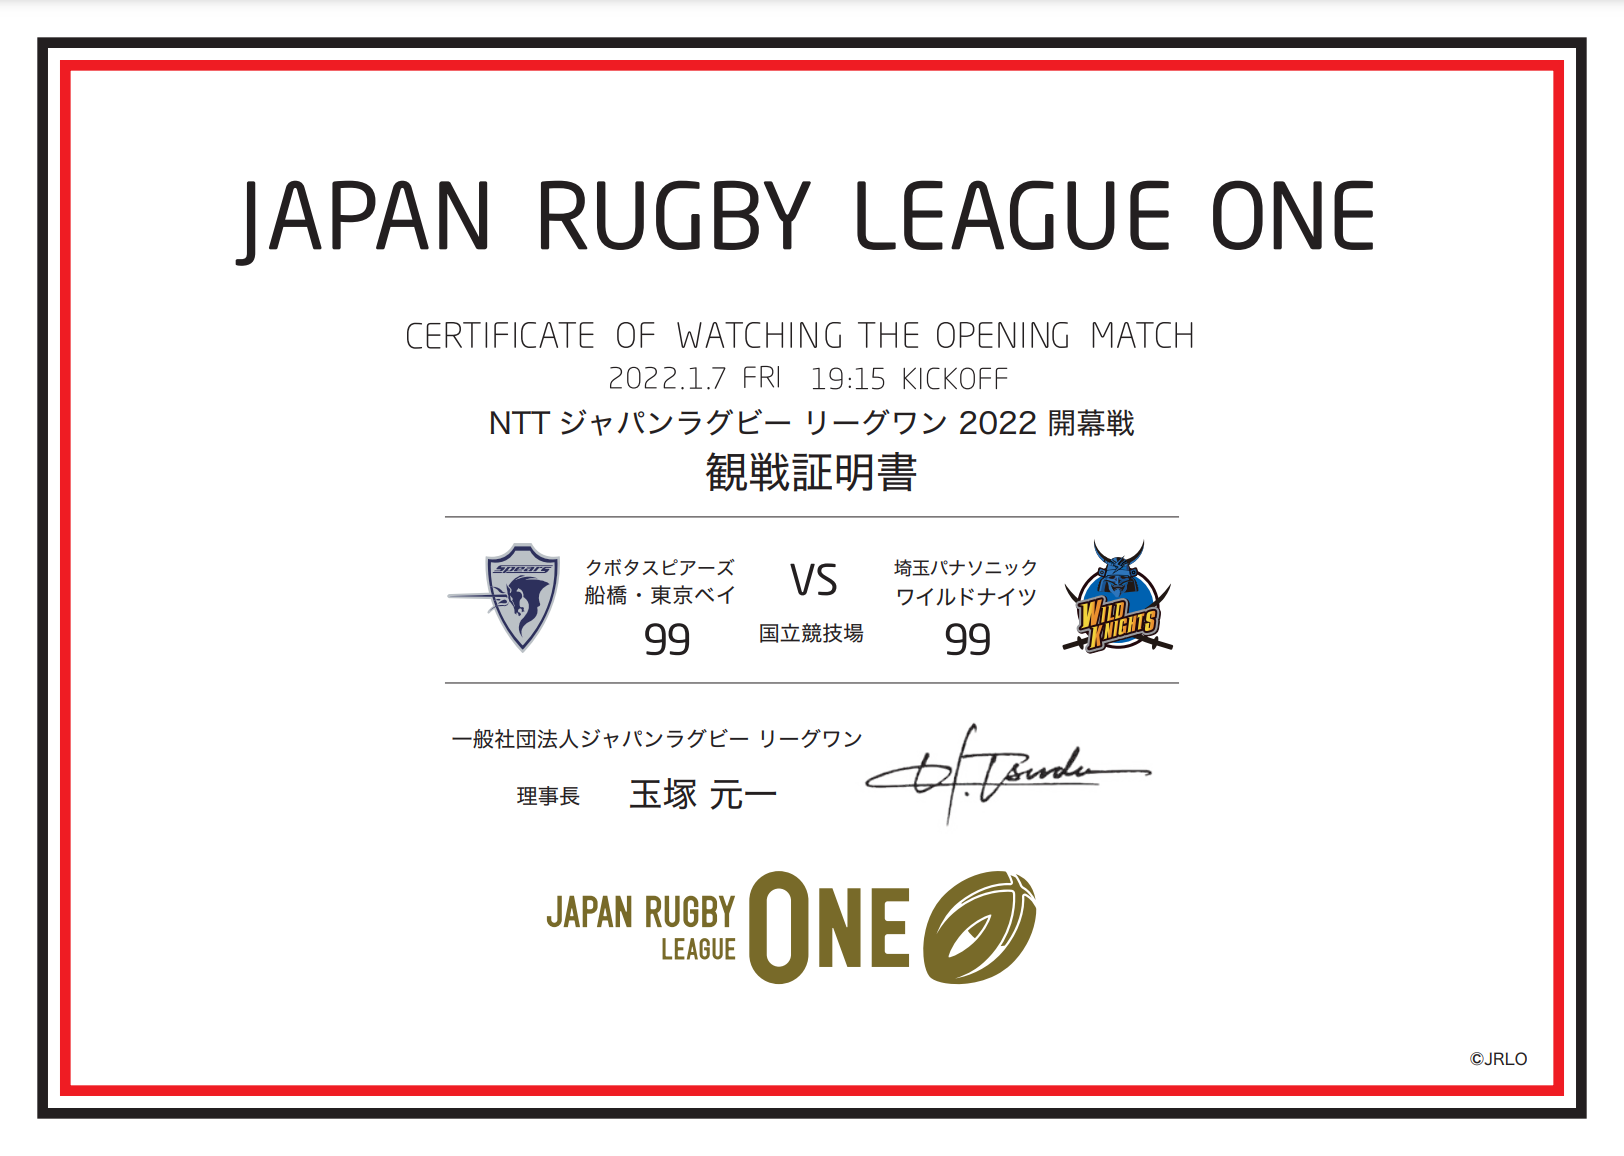 JAPAN RUGBY LEAGUE ONE 公式サイト 開幕戦チケット販売